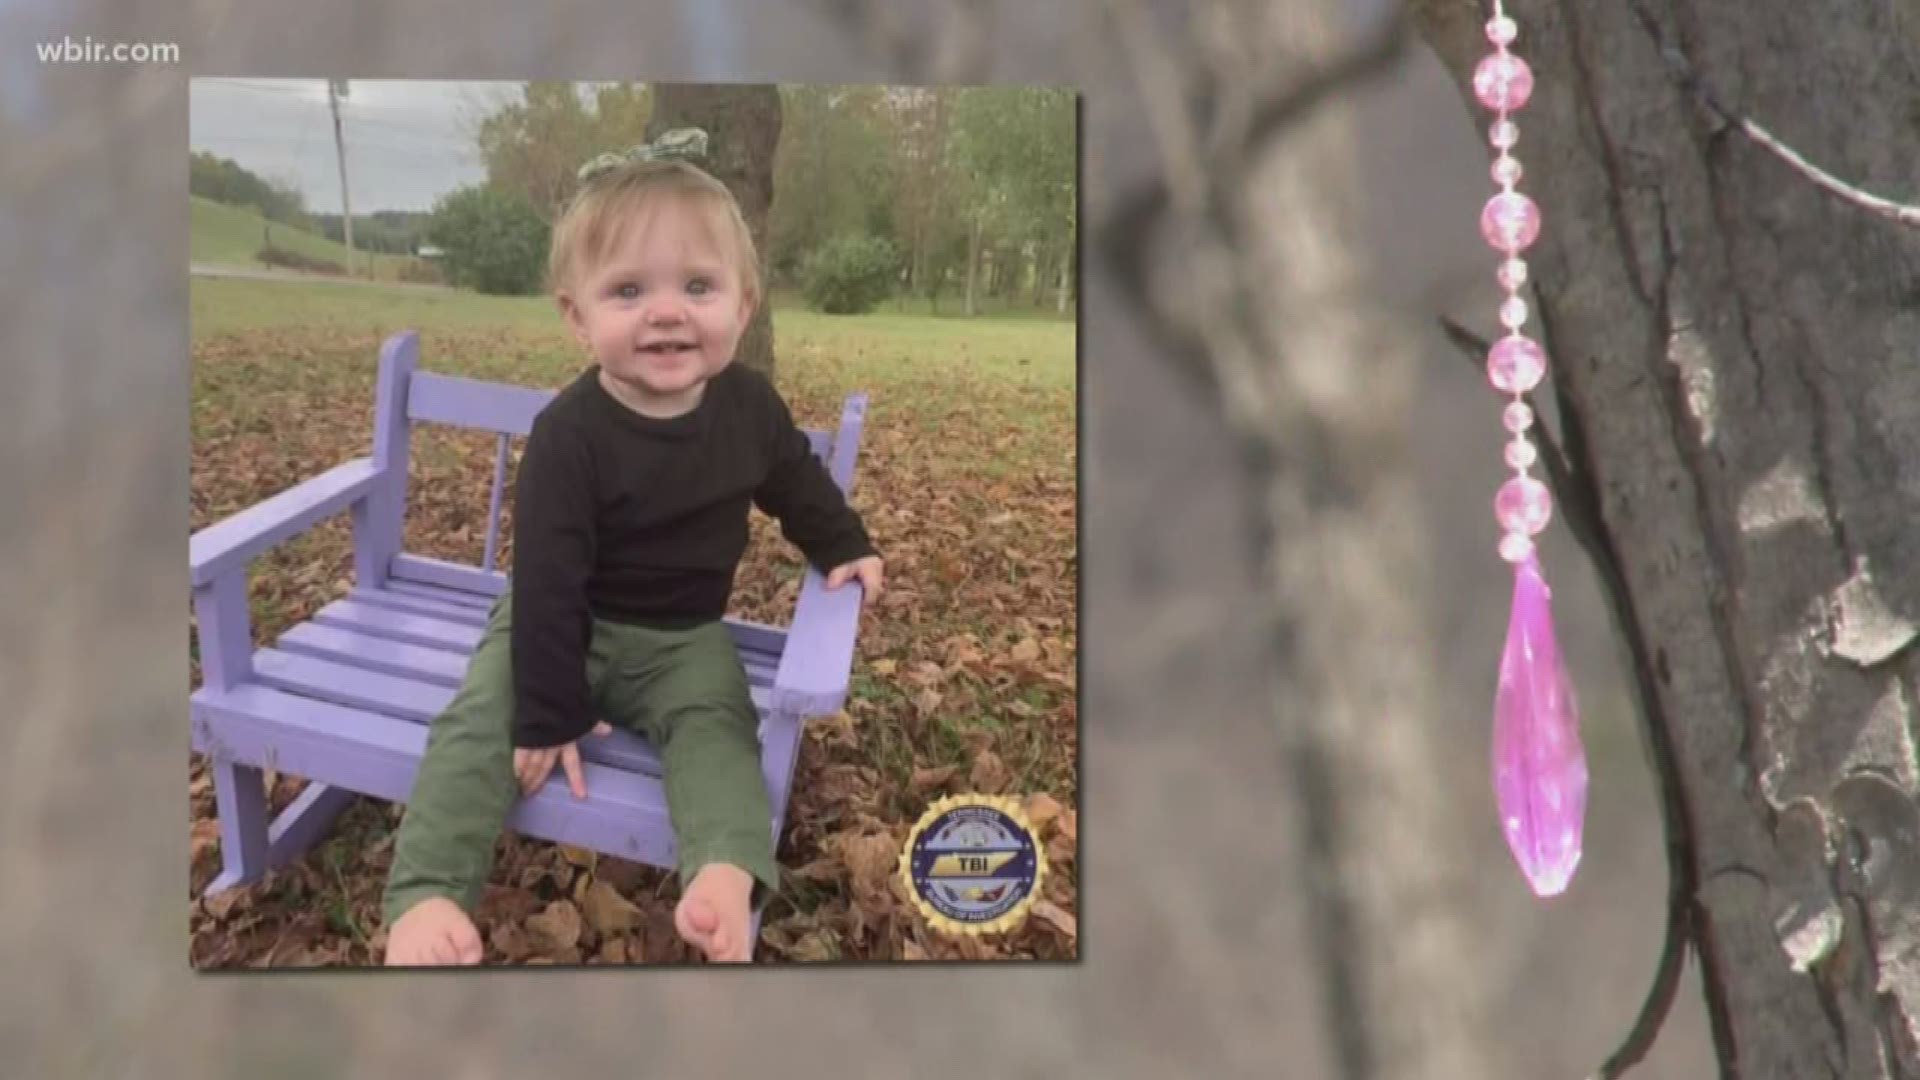 For over two weeks, the rest of the world joined hands with Sullivan County during the search for the missing 15-month-old, uniting in the face of tragedy.